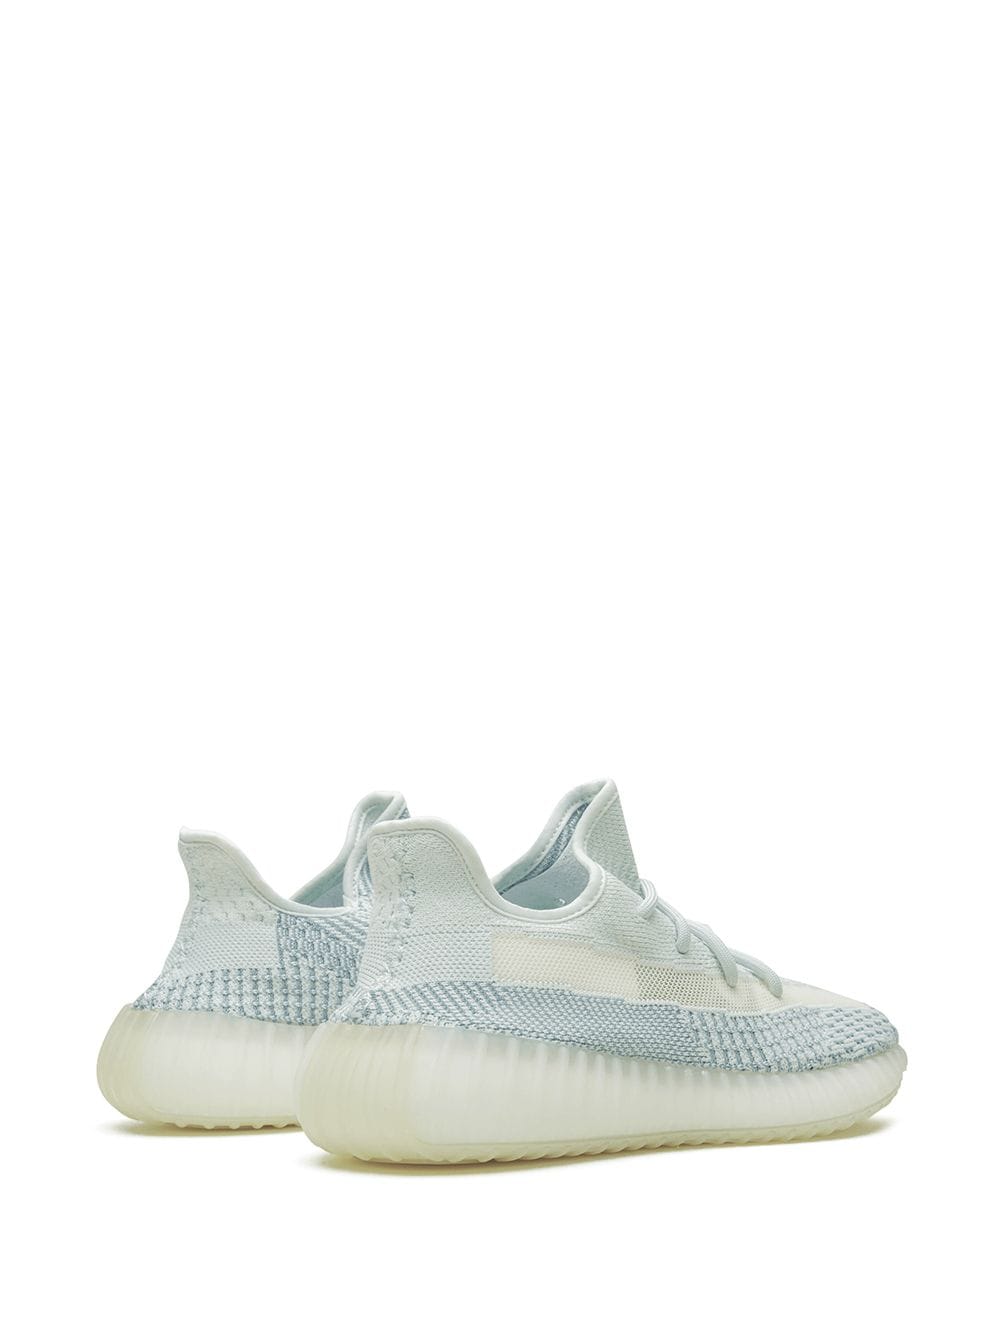 YEEZY Boost 350 v2 Cloud White